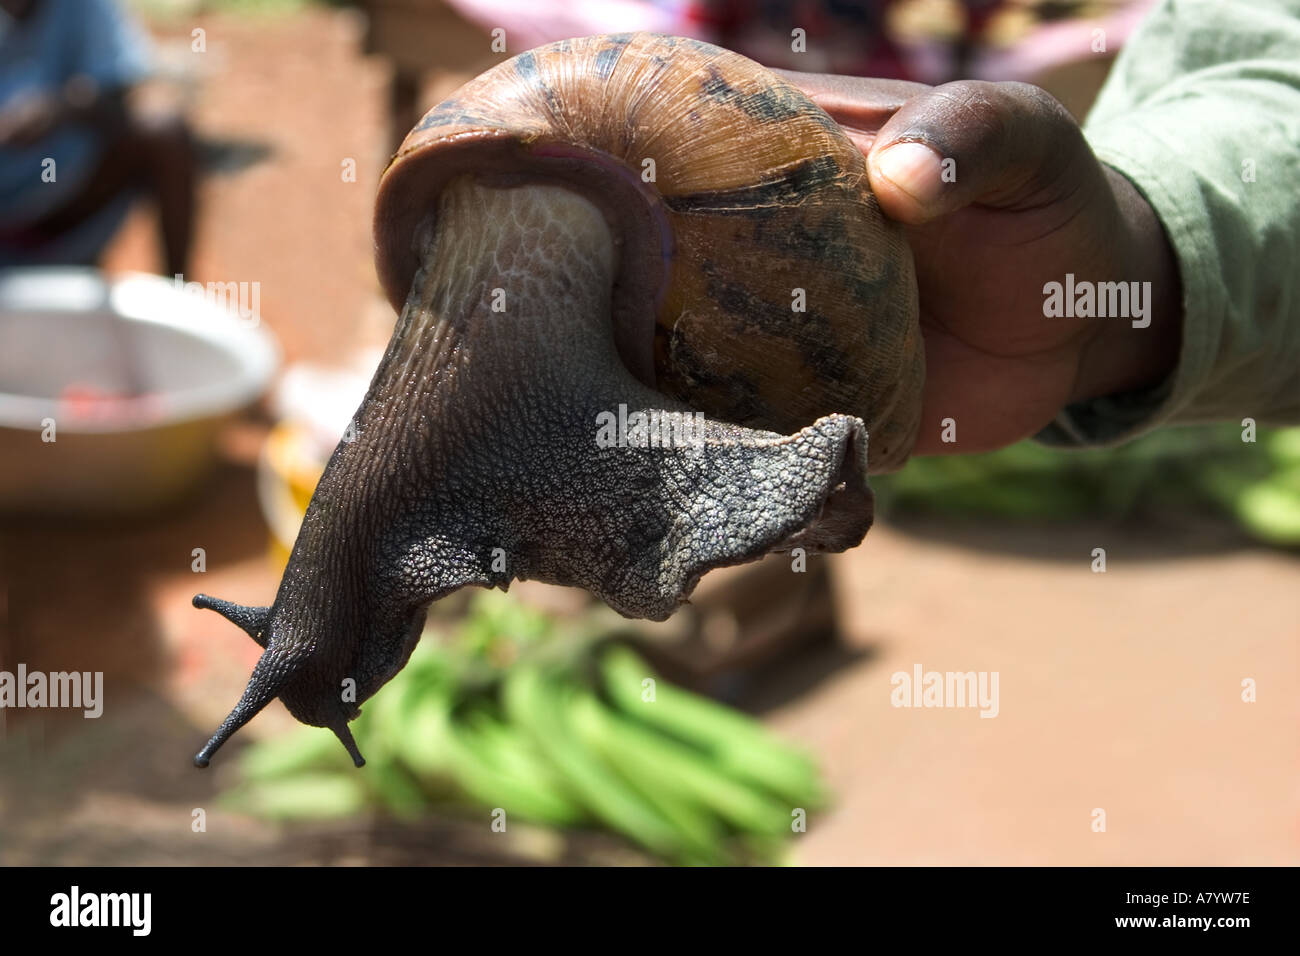 Close up of a giant West African tiger snail held in trader's hand, for sale in Bogoso open air food market, Western Ghana Stock Photo